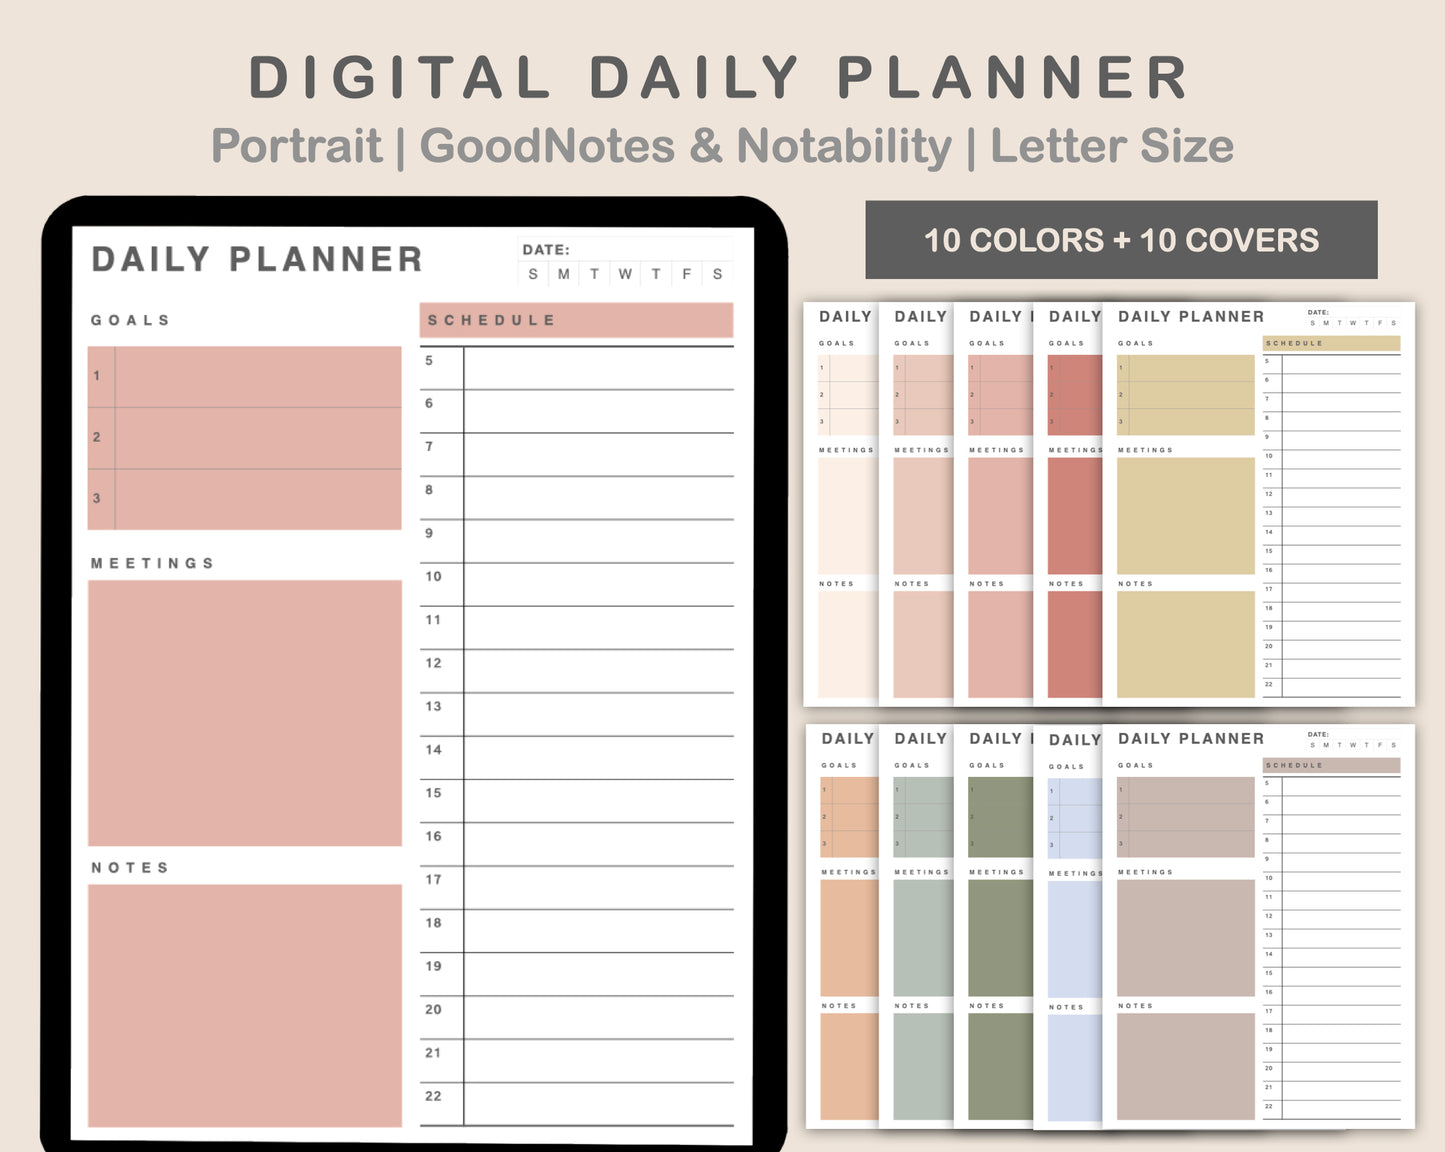 Daily Planner, Hourly Planner - Portrait